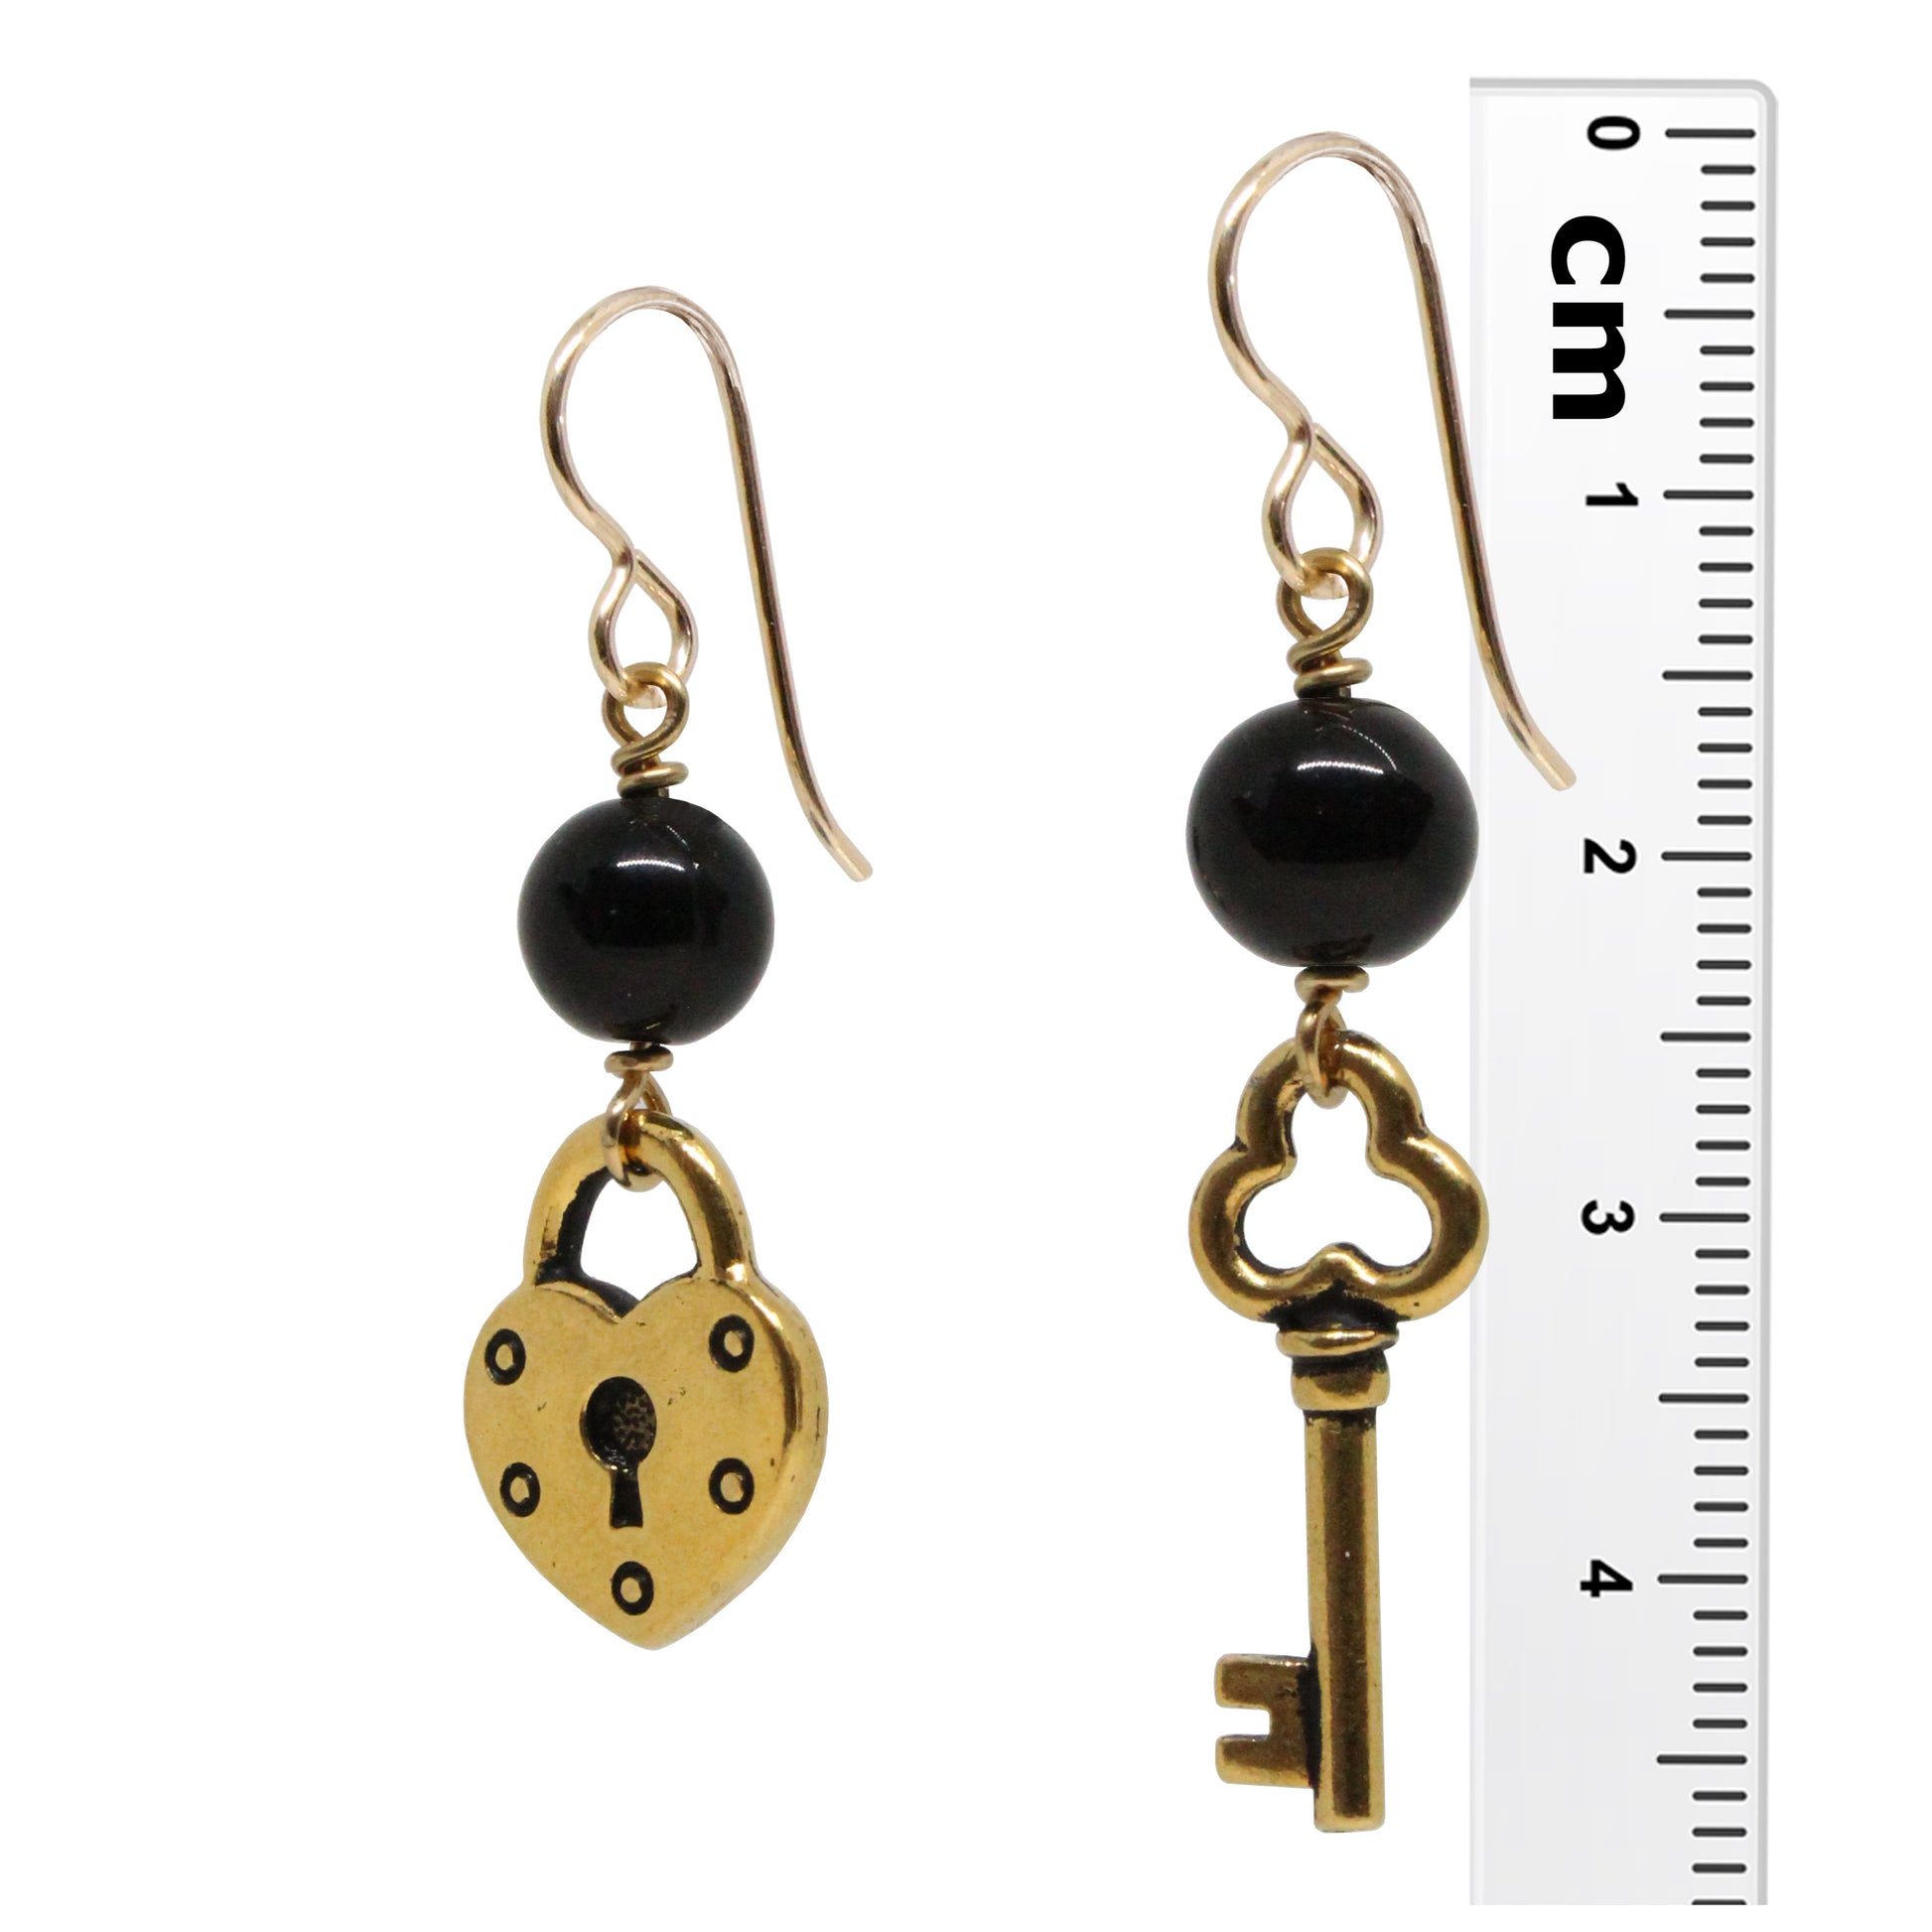 Lock and Key Earrings / 47mm length / gold filled earwires / choose fr –  StravaMax Jewelry Etc